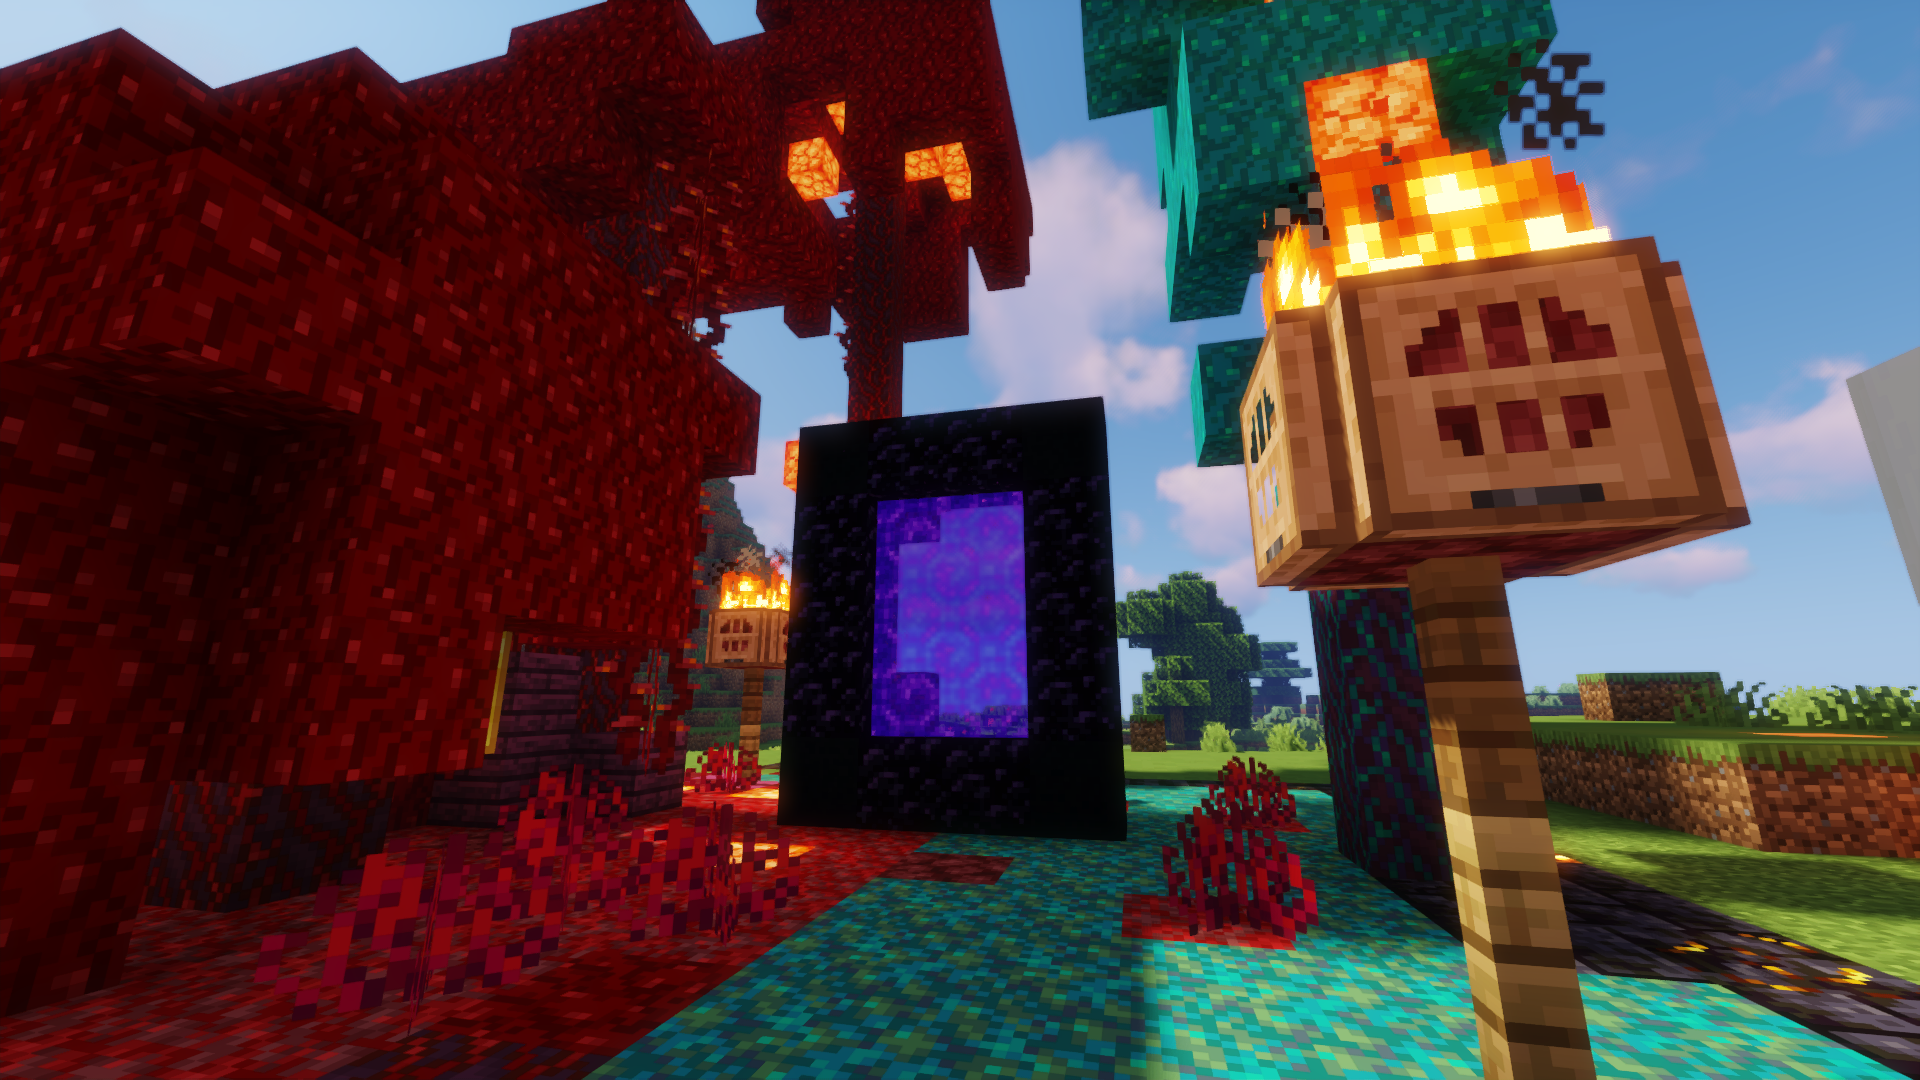 General 1920x1080 Minecraft screen shot PC gaming shaders video games portal red cyan trees fire grass black